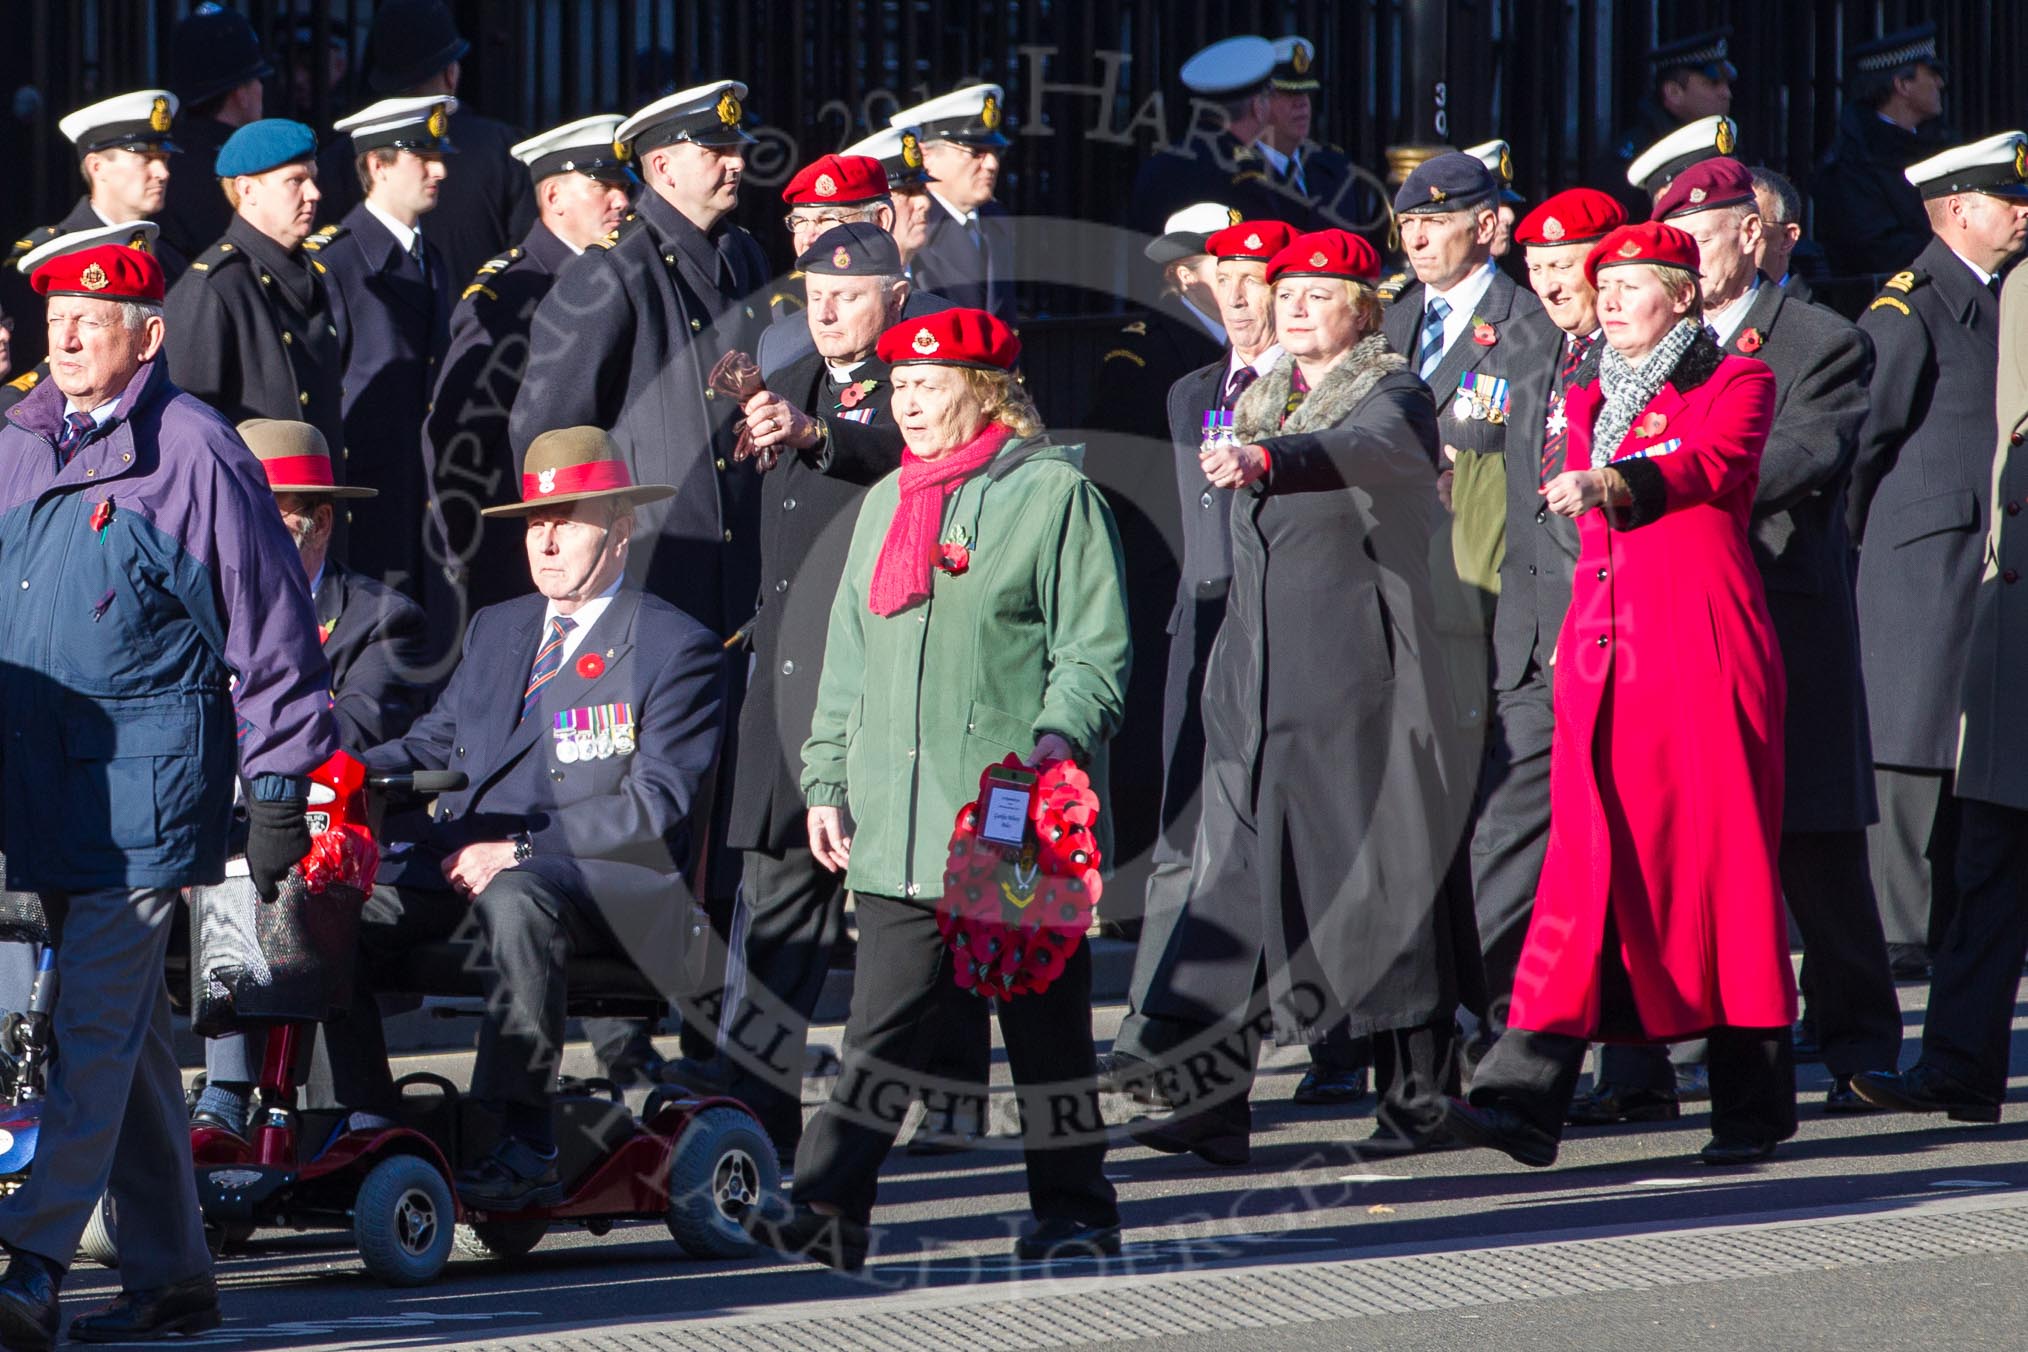 Remembrance Sunday 2012 Cenotaph March Past: Group B3, Royal Military Police Association..
Whitehall, Cenotaph,
London SW1,

United Kingdom,
on 11 November 2012 at 11:55, image #834